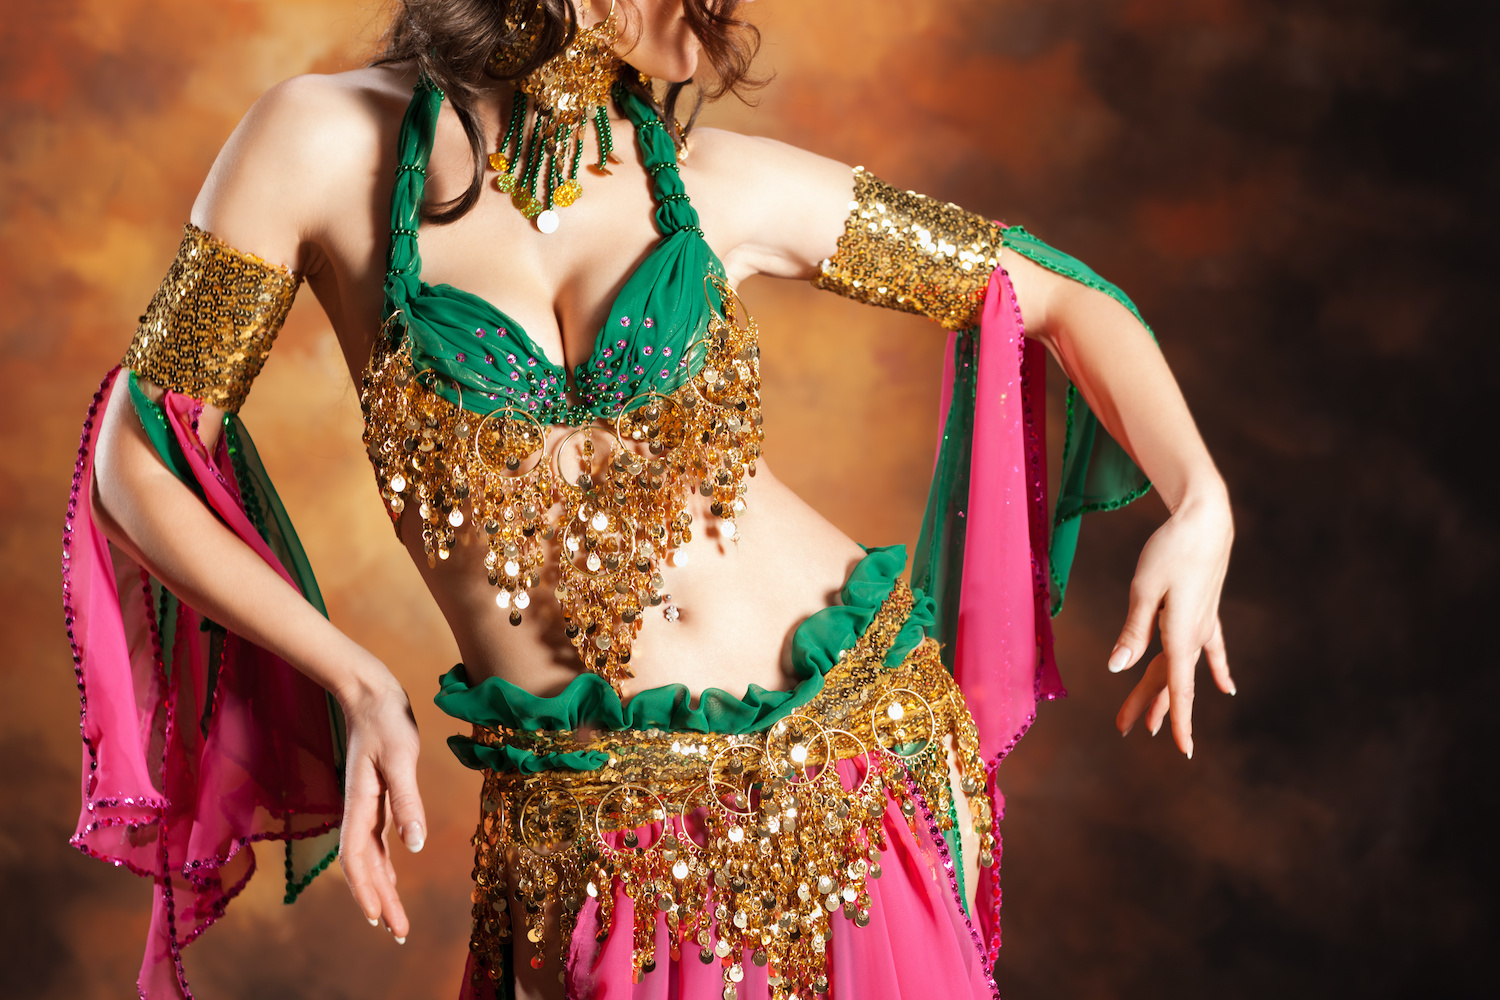 Belly dance music - oriental music, egyptian music, exotic melodies